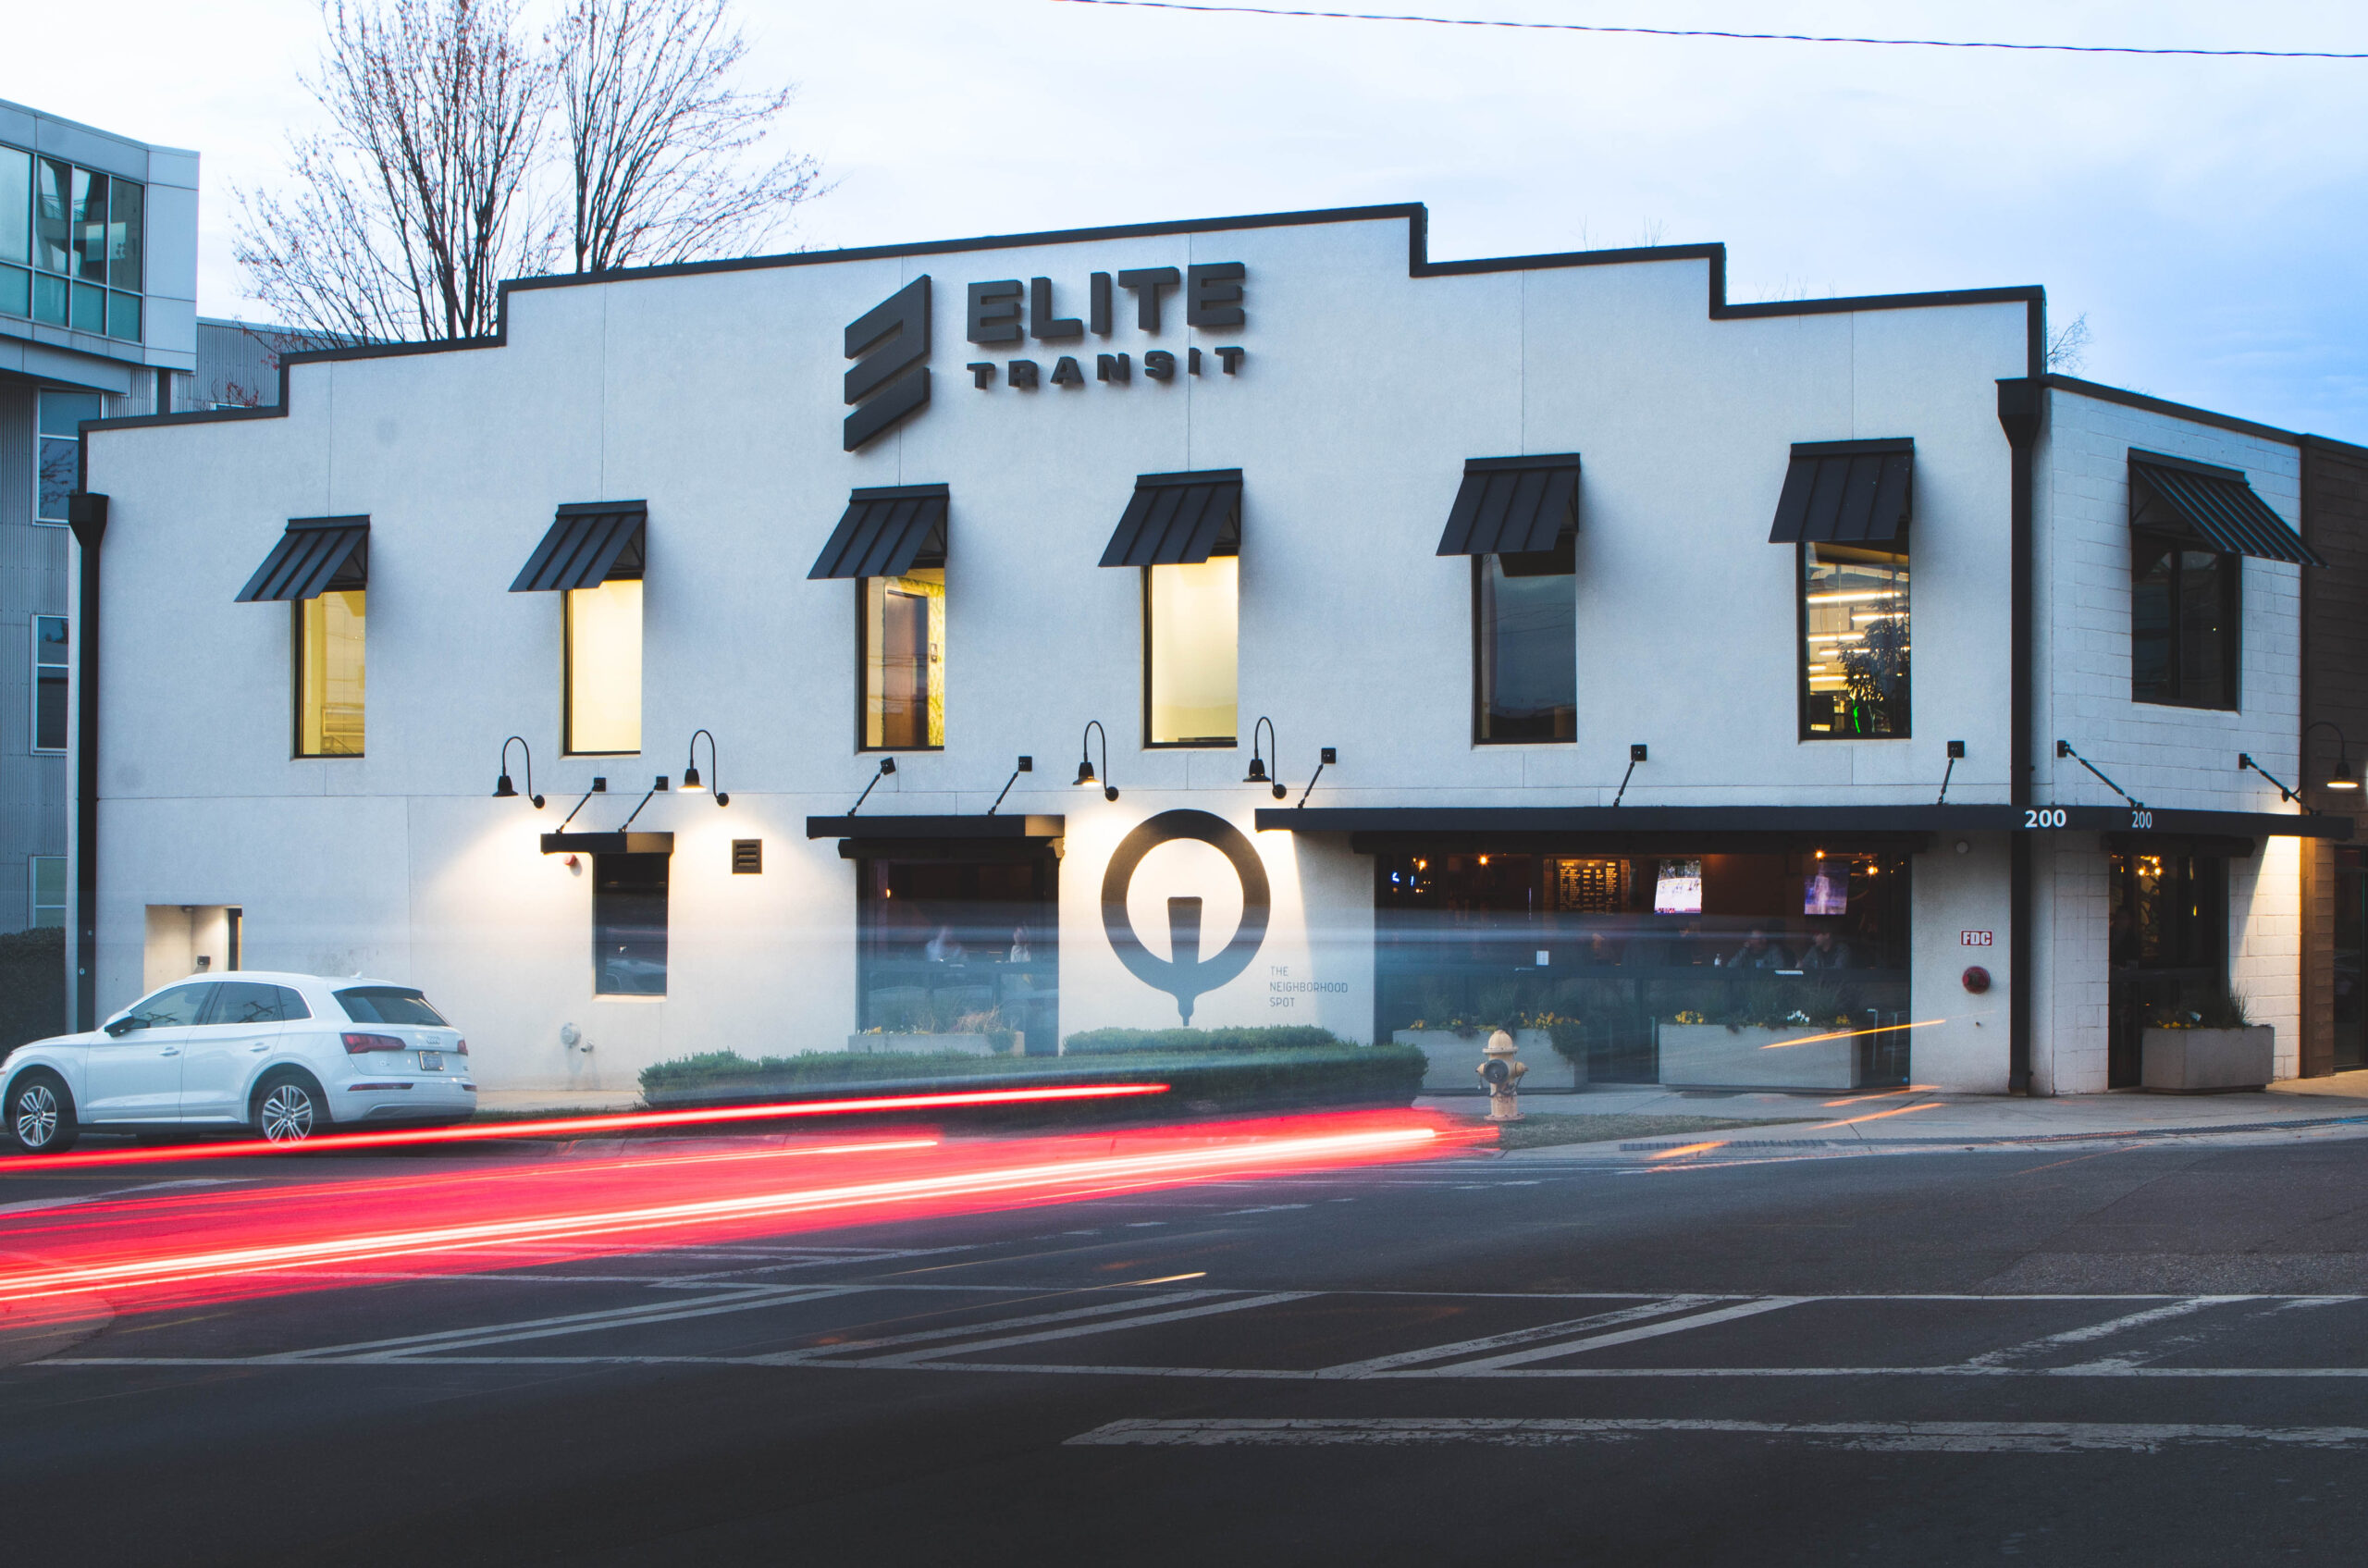 ELITE Transit Solutions exterior in Charlotte, NC. It's a white building with black shutters above QC Pourhouse, a popular bar with a black logo. The exposure is delayed causing a red blur from car headlights.